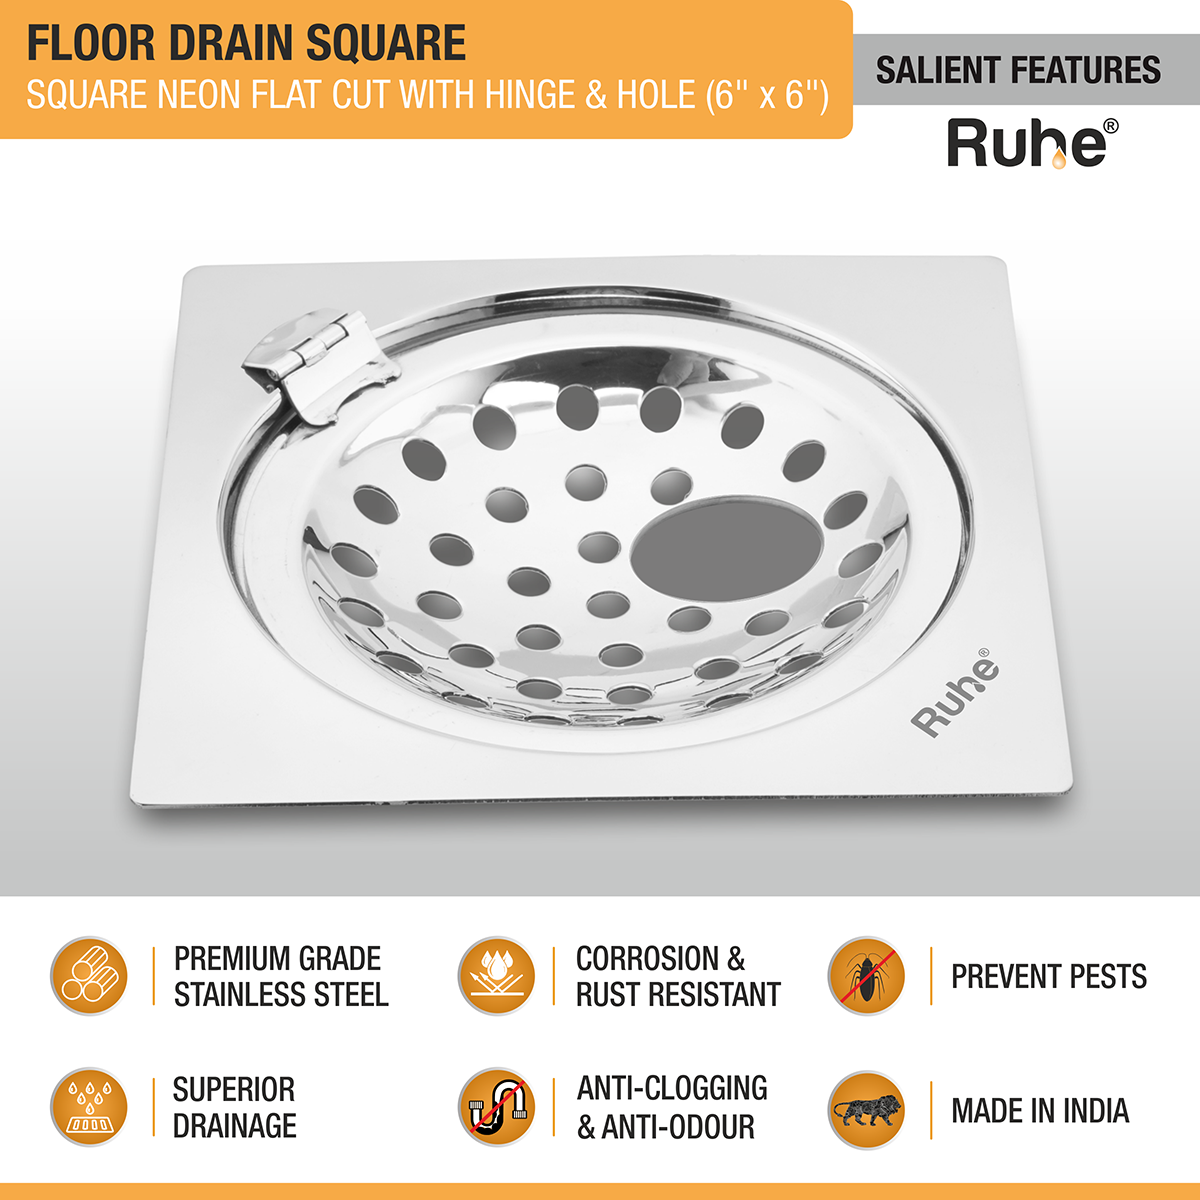 Neon Square Flat Cut Floor Drain (6 x 6 inches) with Hole and Hinged Grating Top features